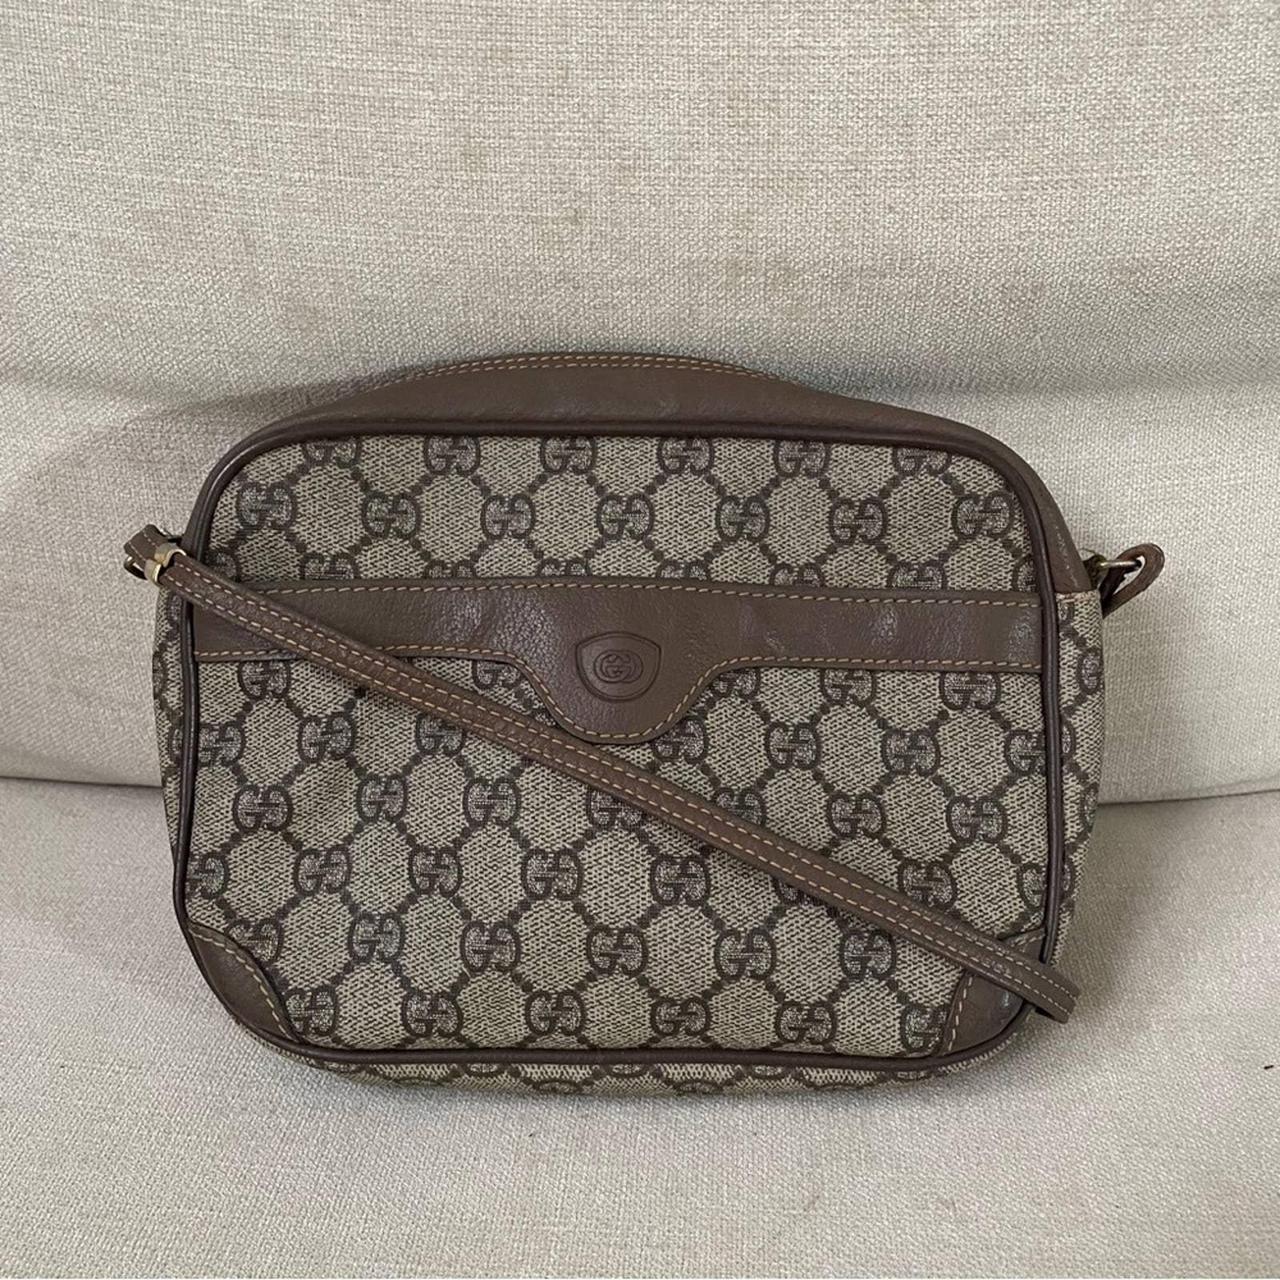 Authentic Gucci Vintage Leather Purse! - Has been - Depop